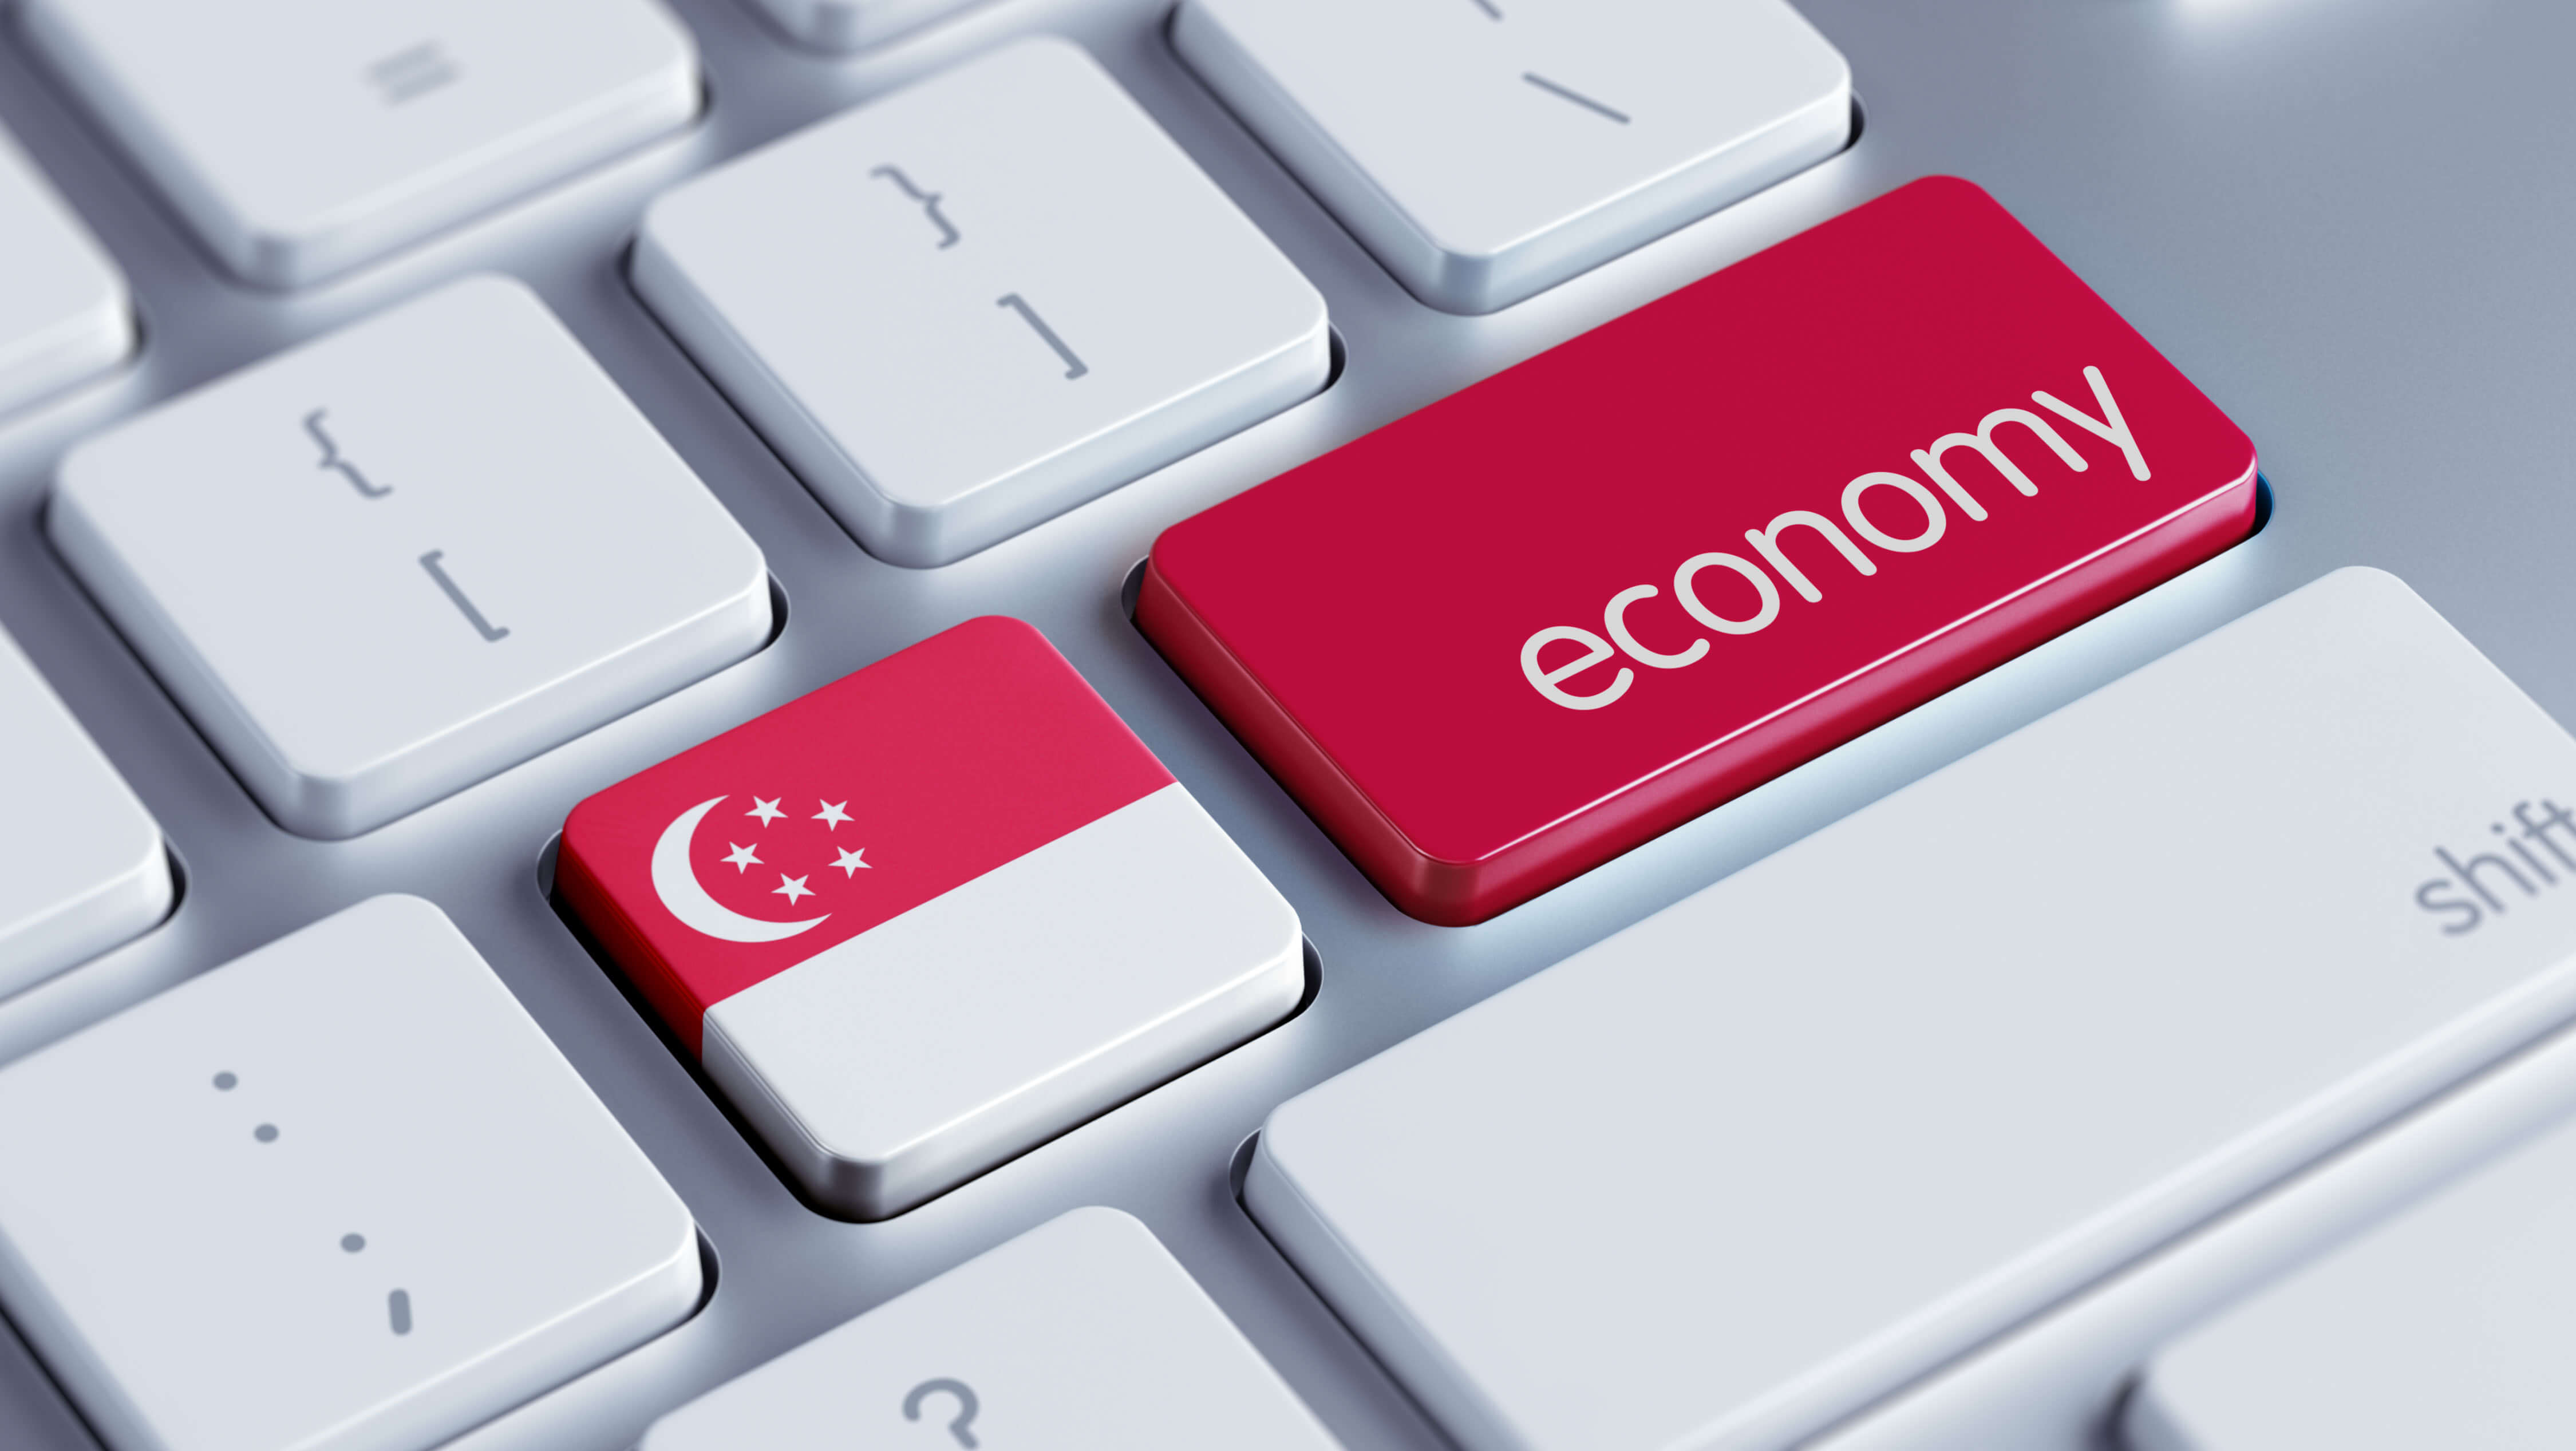 FinanceBrokerage - Economic News:  Ministry of Trade and Industry expects the Singapore economy to shrink between 1.0% and 4.0% in 2020.